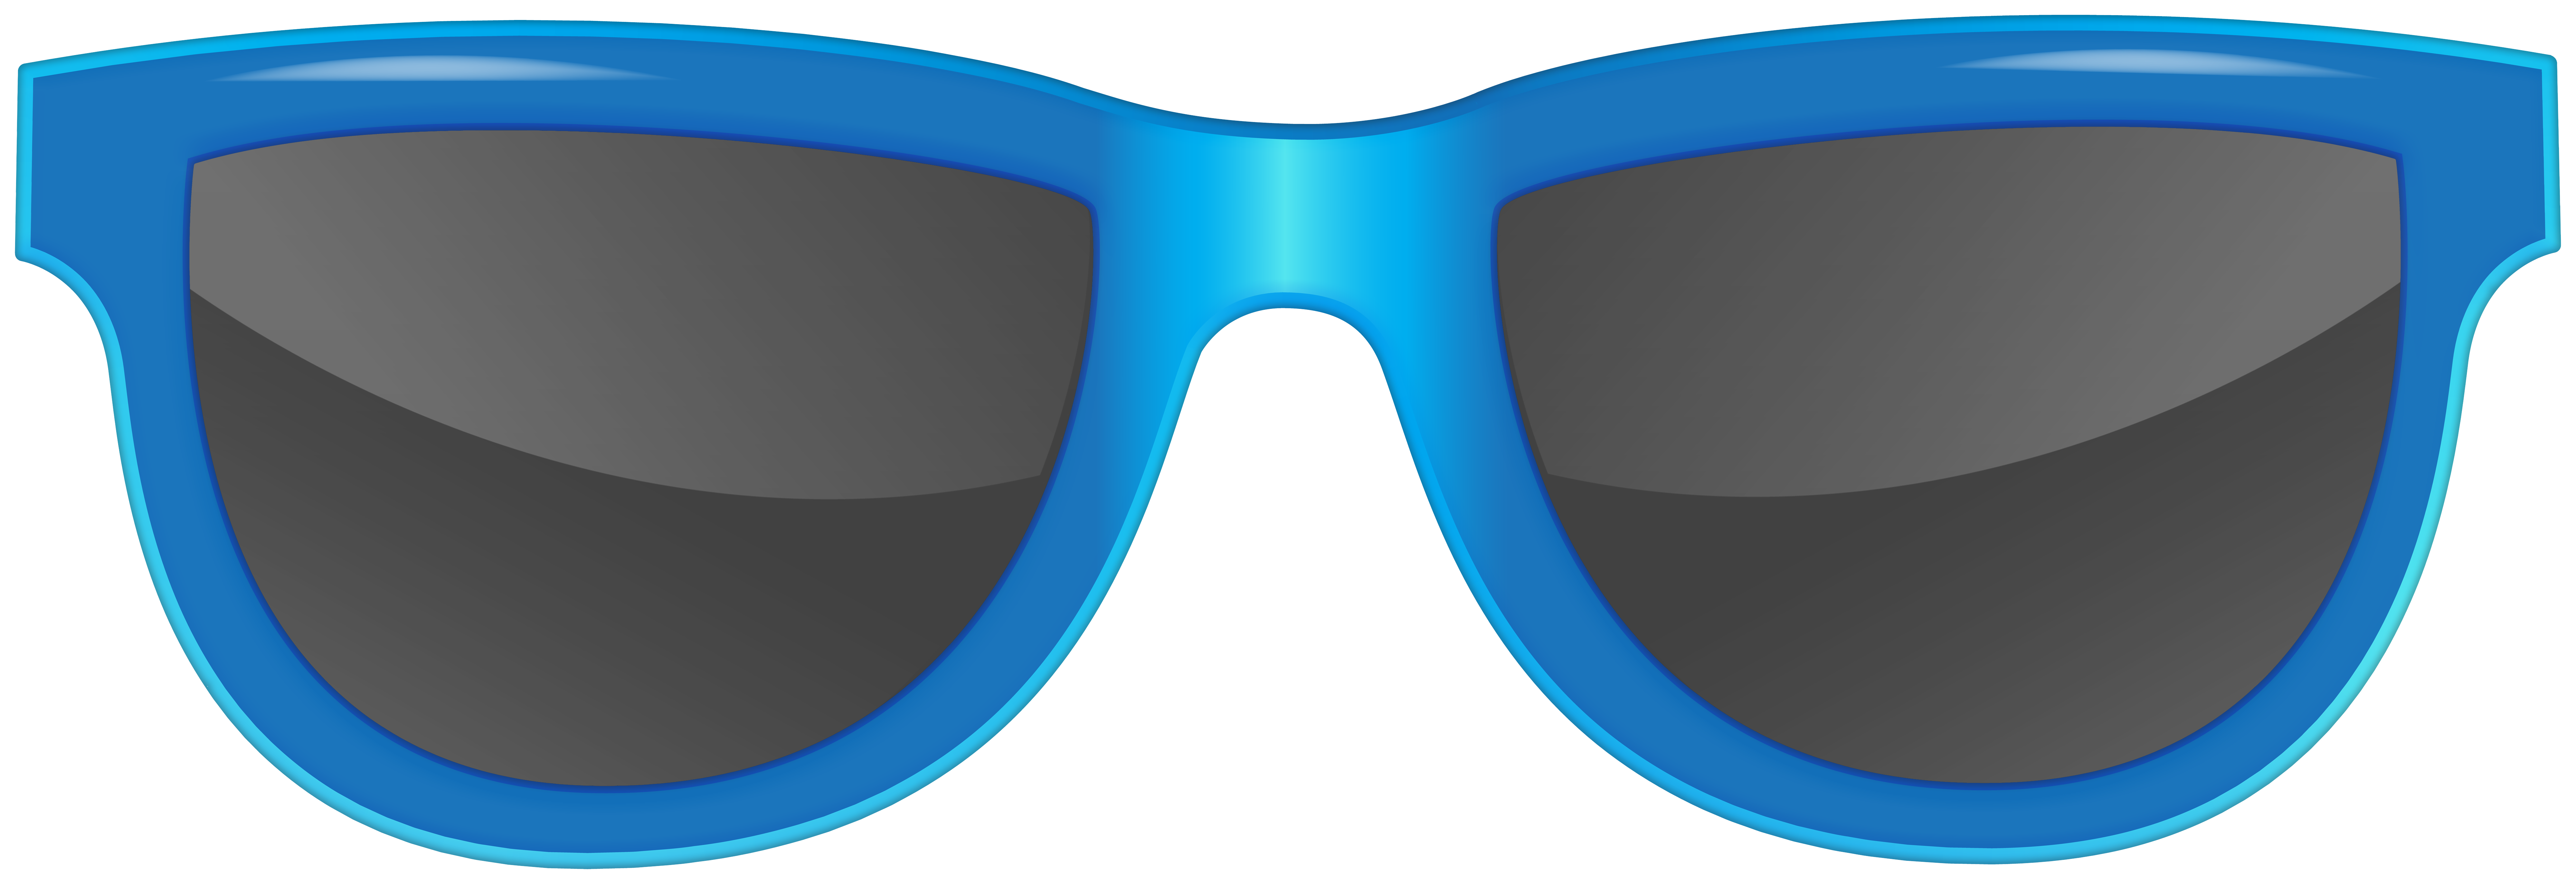 Download Blue Sunglasses PNG Clipart | Gallery Yopriceville - High ...